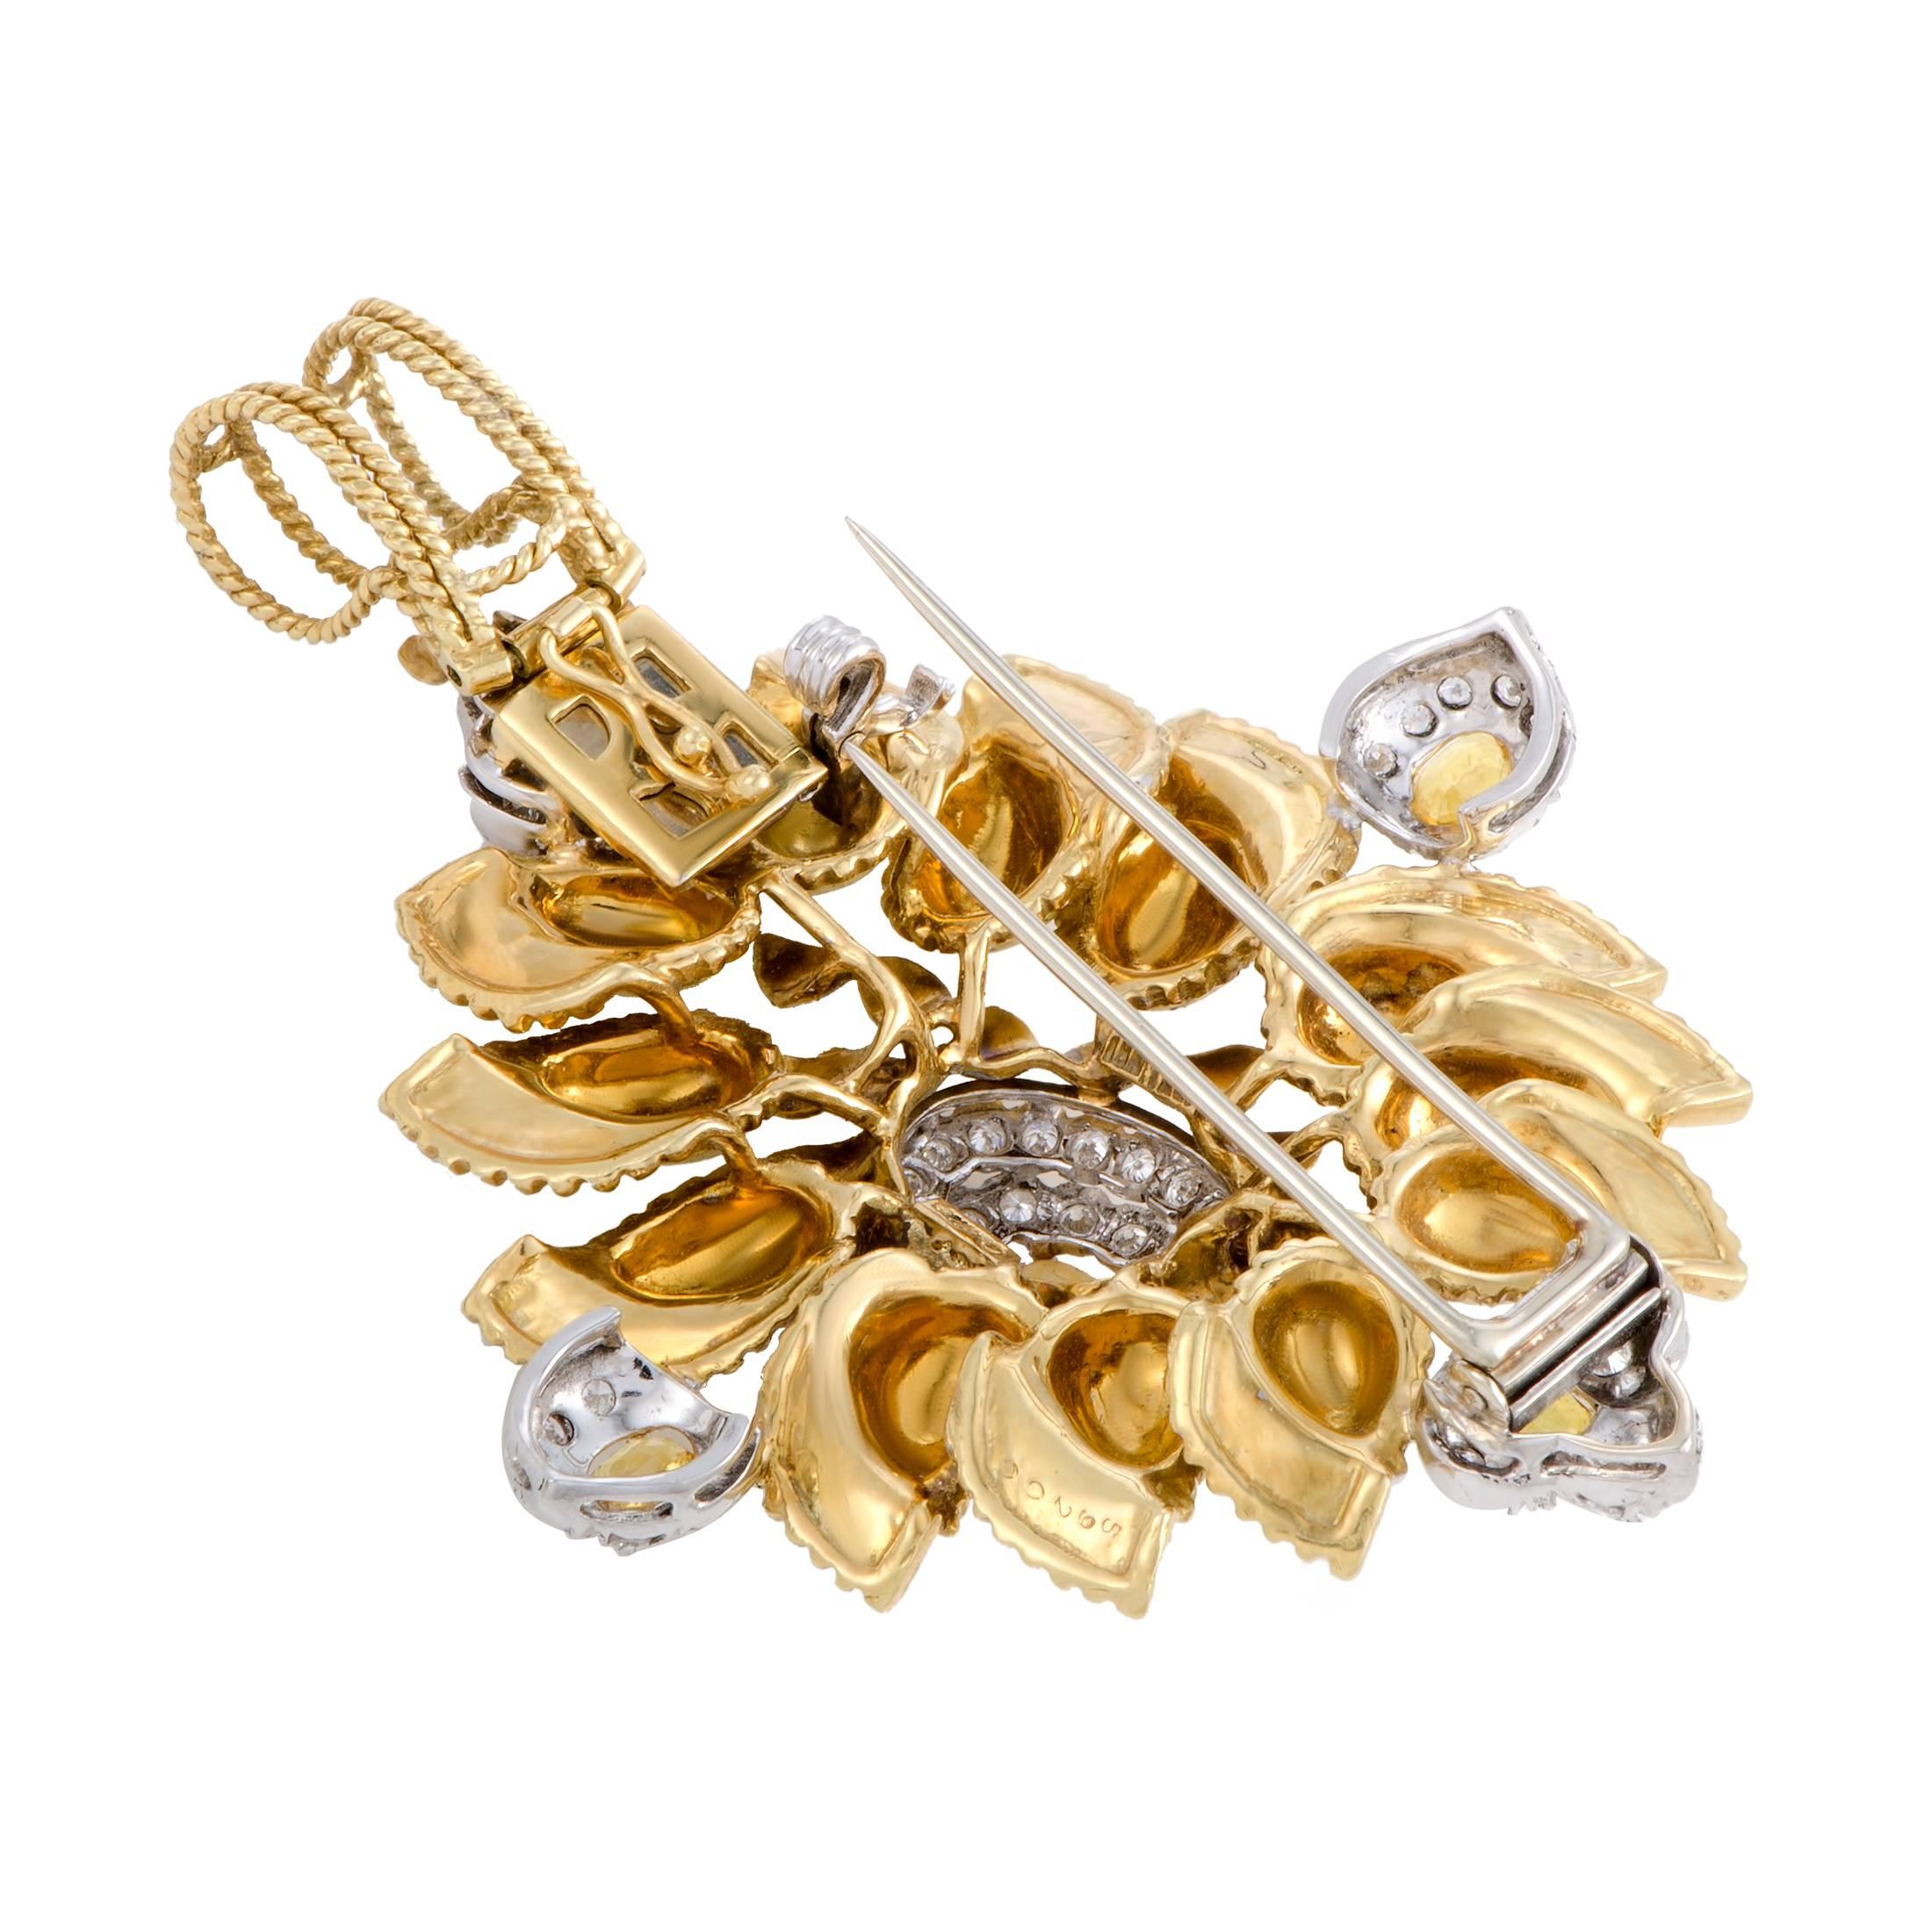 The spectacularly intricate design and the resplendent diamond décor give an incredibly luxurious appeal to this stunning one-of-a-kind brooch from Cartier that can also be worn as a pendant. Made of 18K yellow and white gold, the brooch is